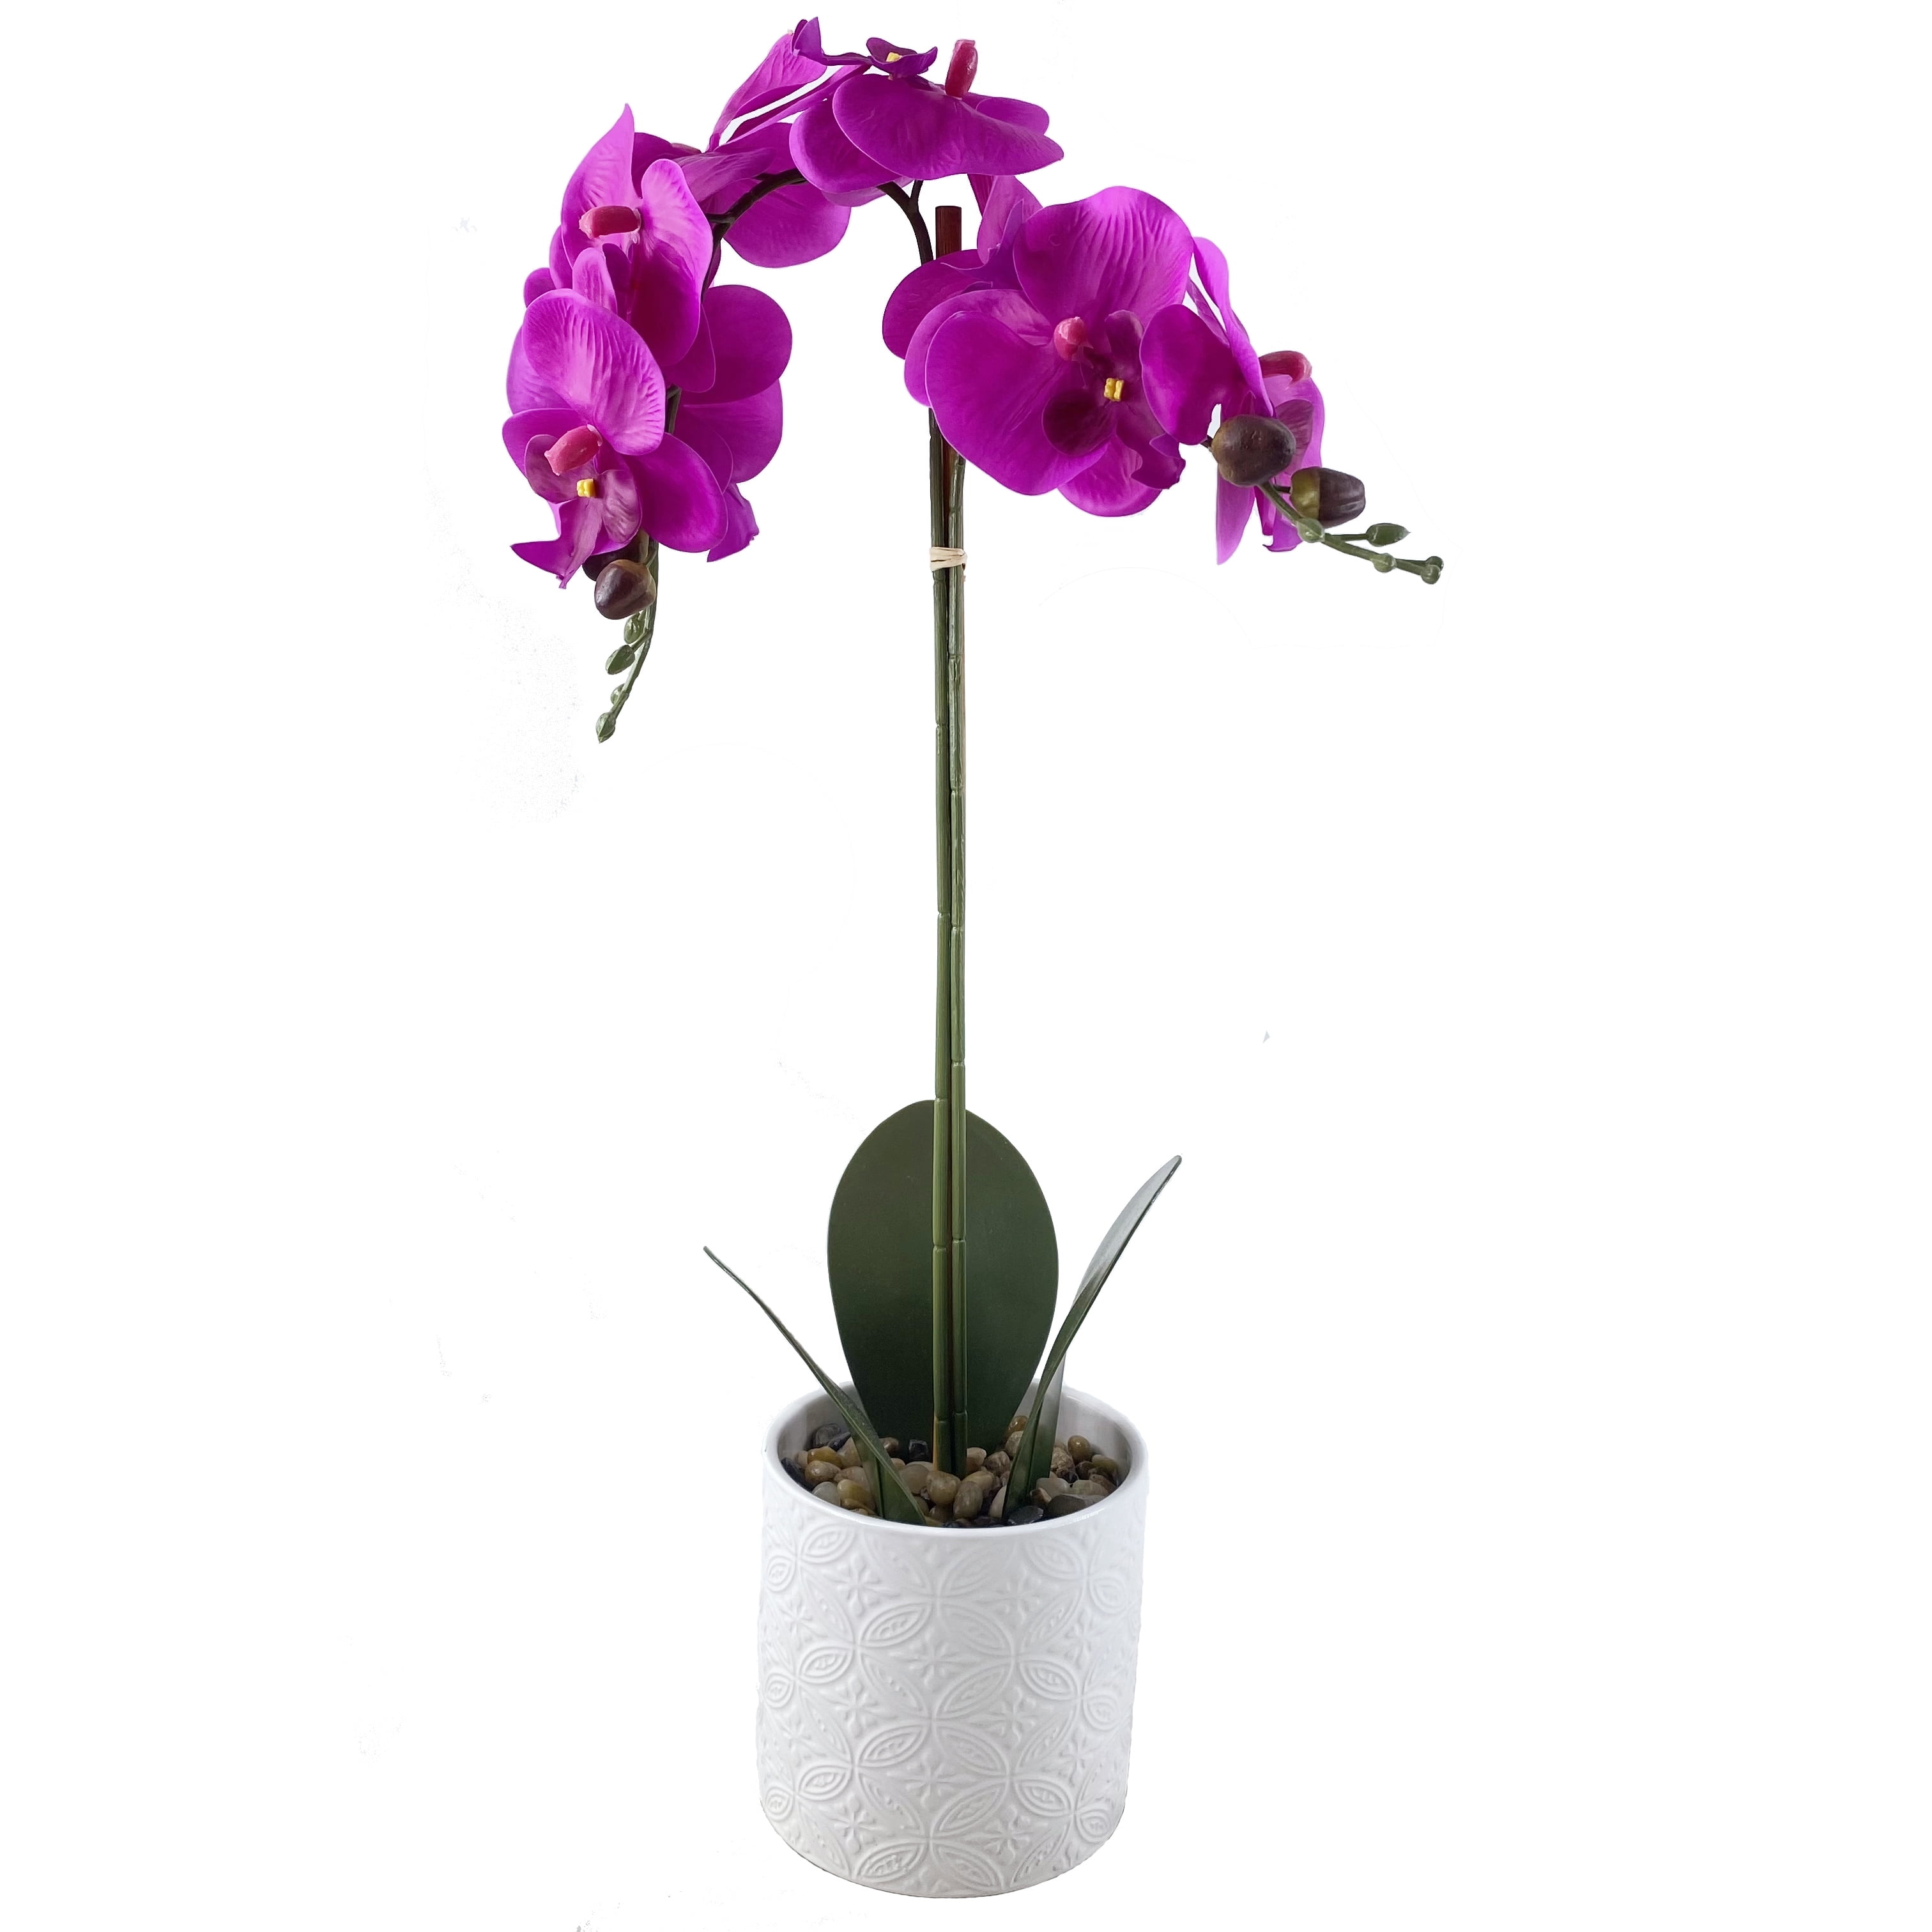 Set of 2 White Artificial Orchid Floral Bundles with Fuchsia Centers